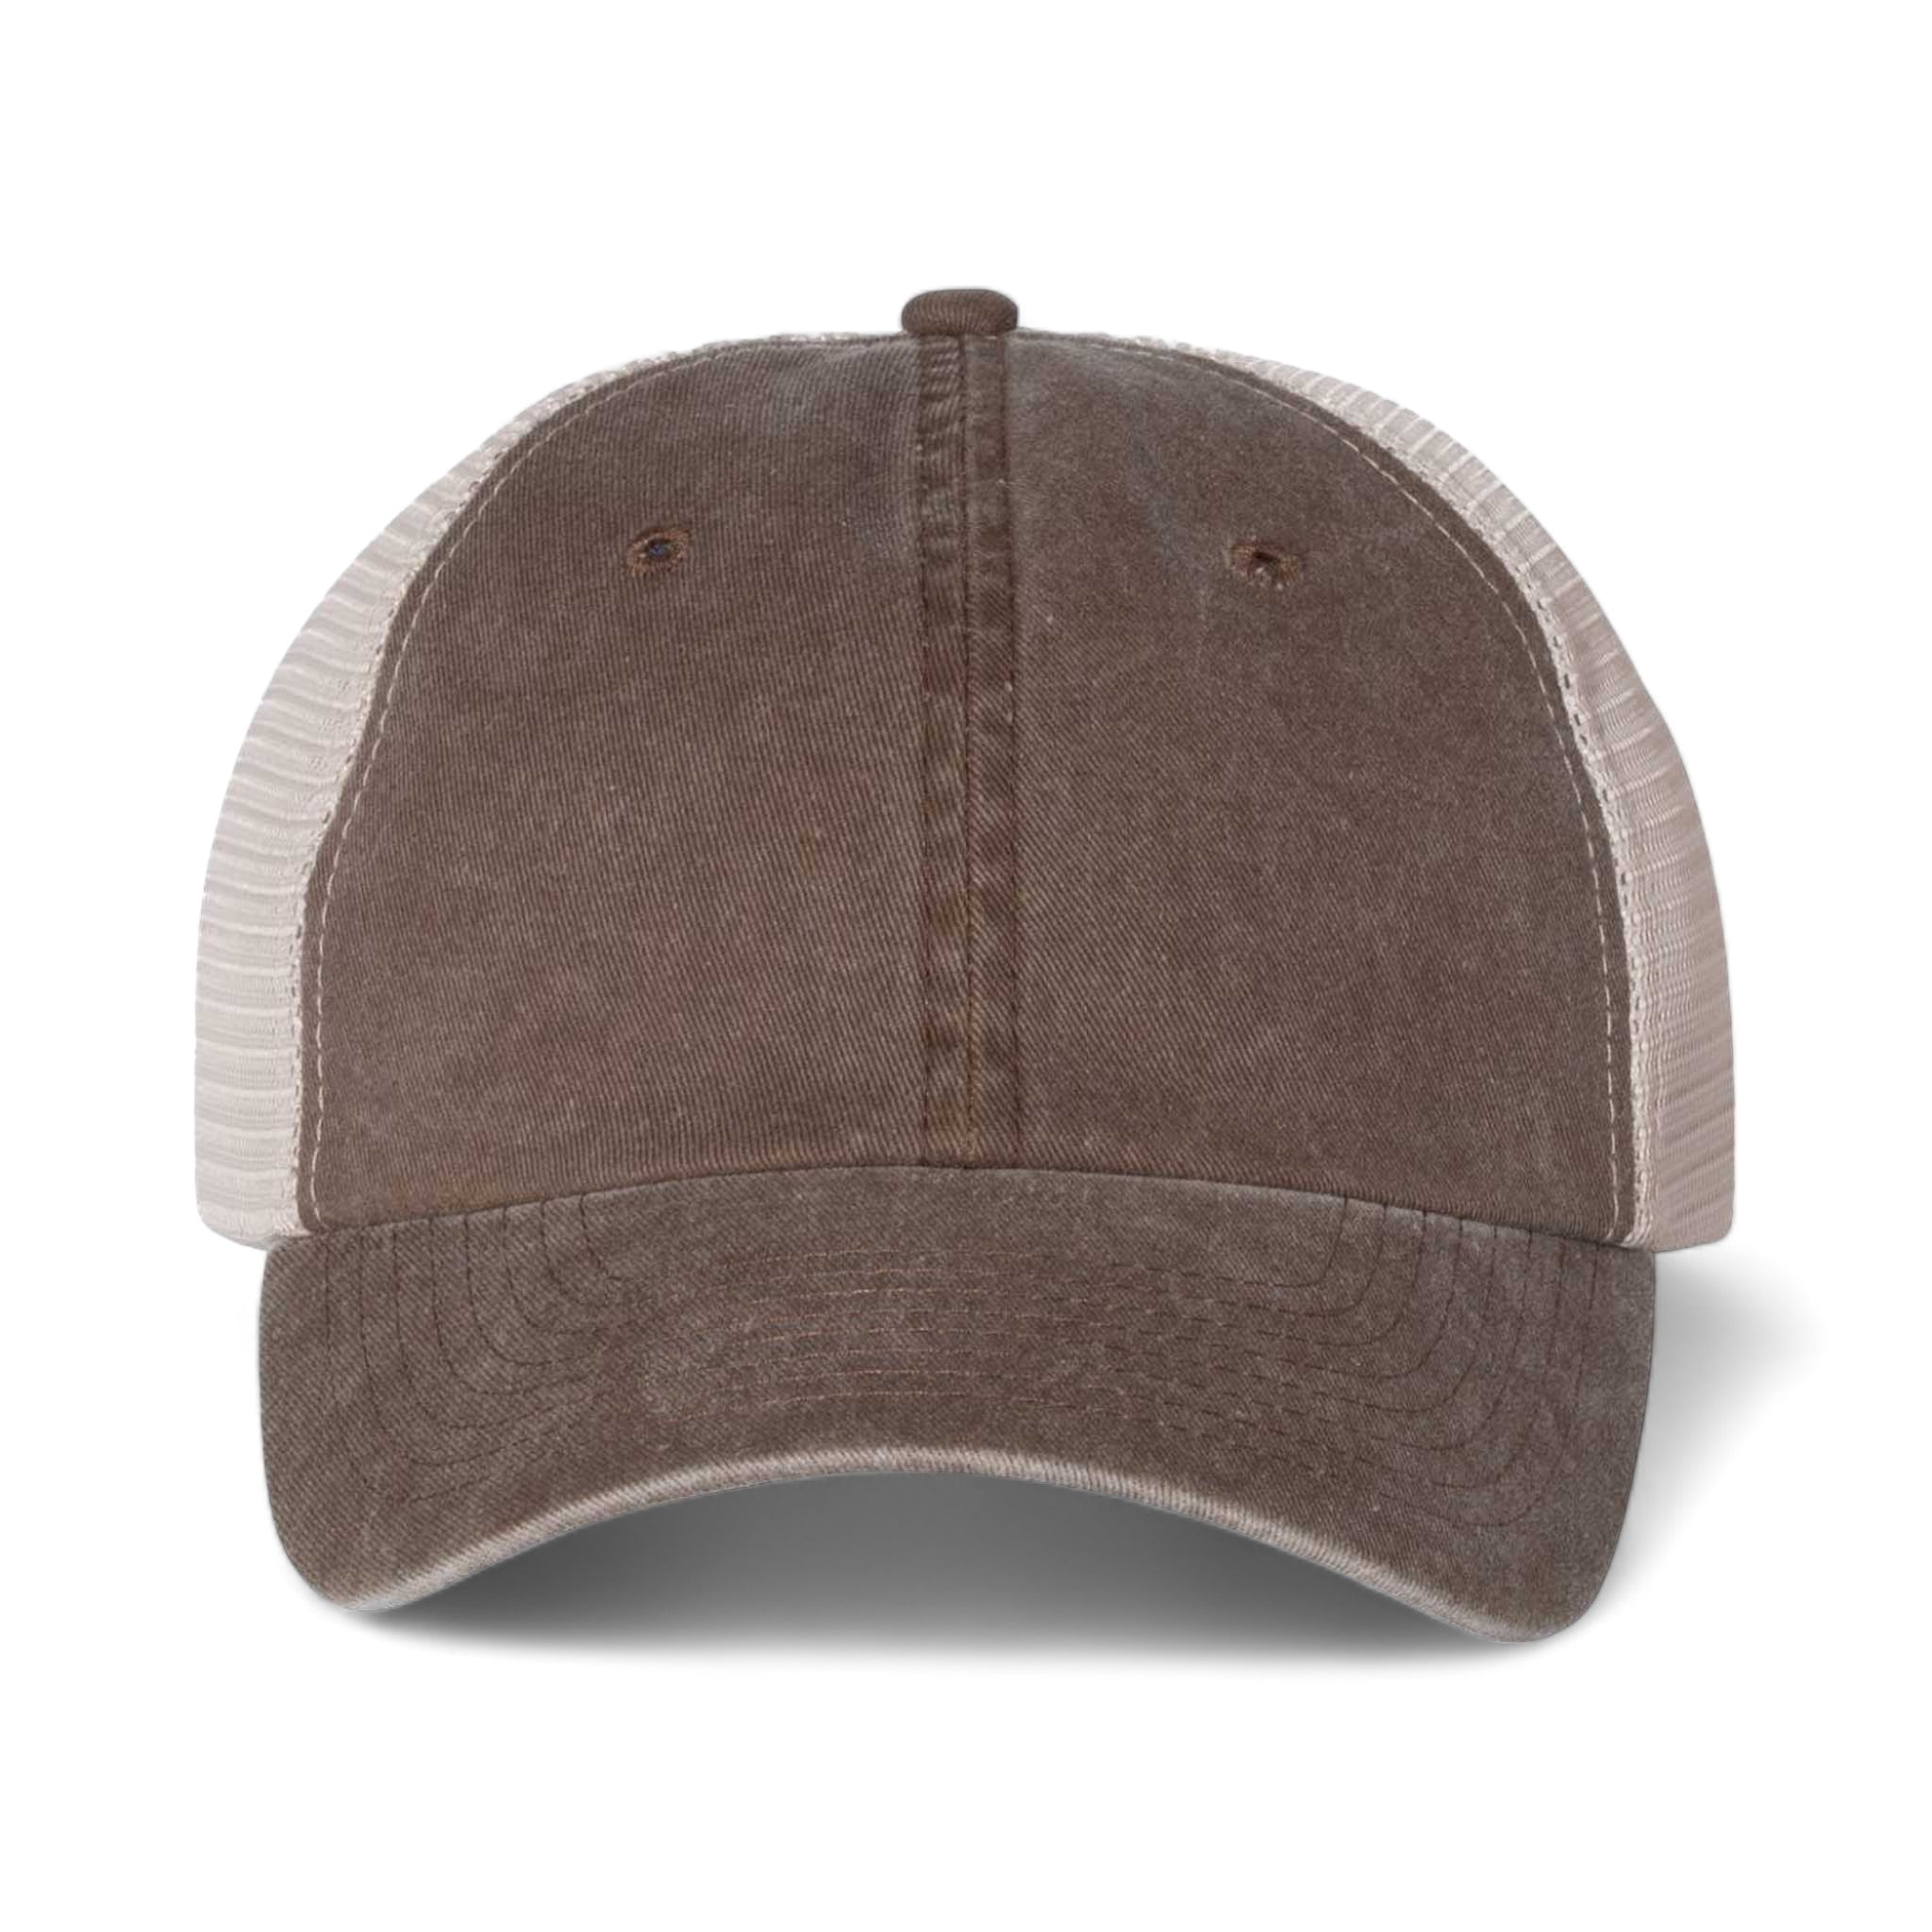 Front view of Sportsman SP510 custom hat in brown and stone